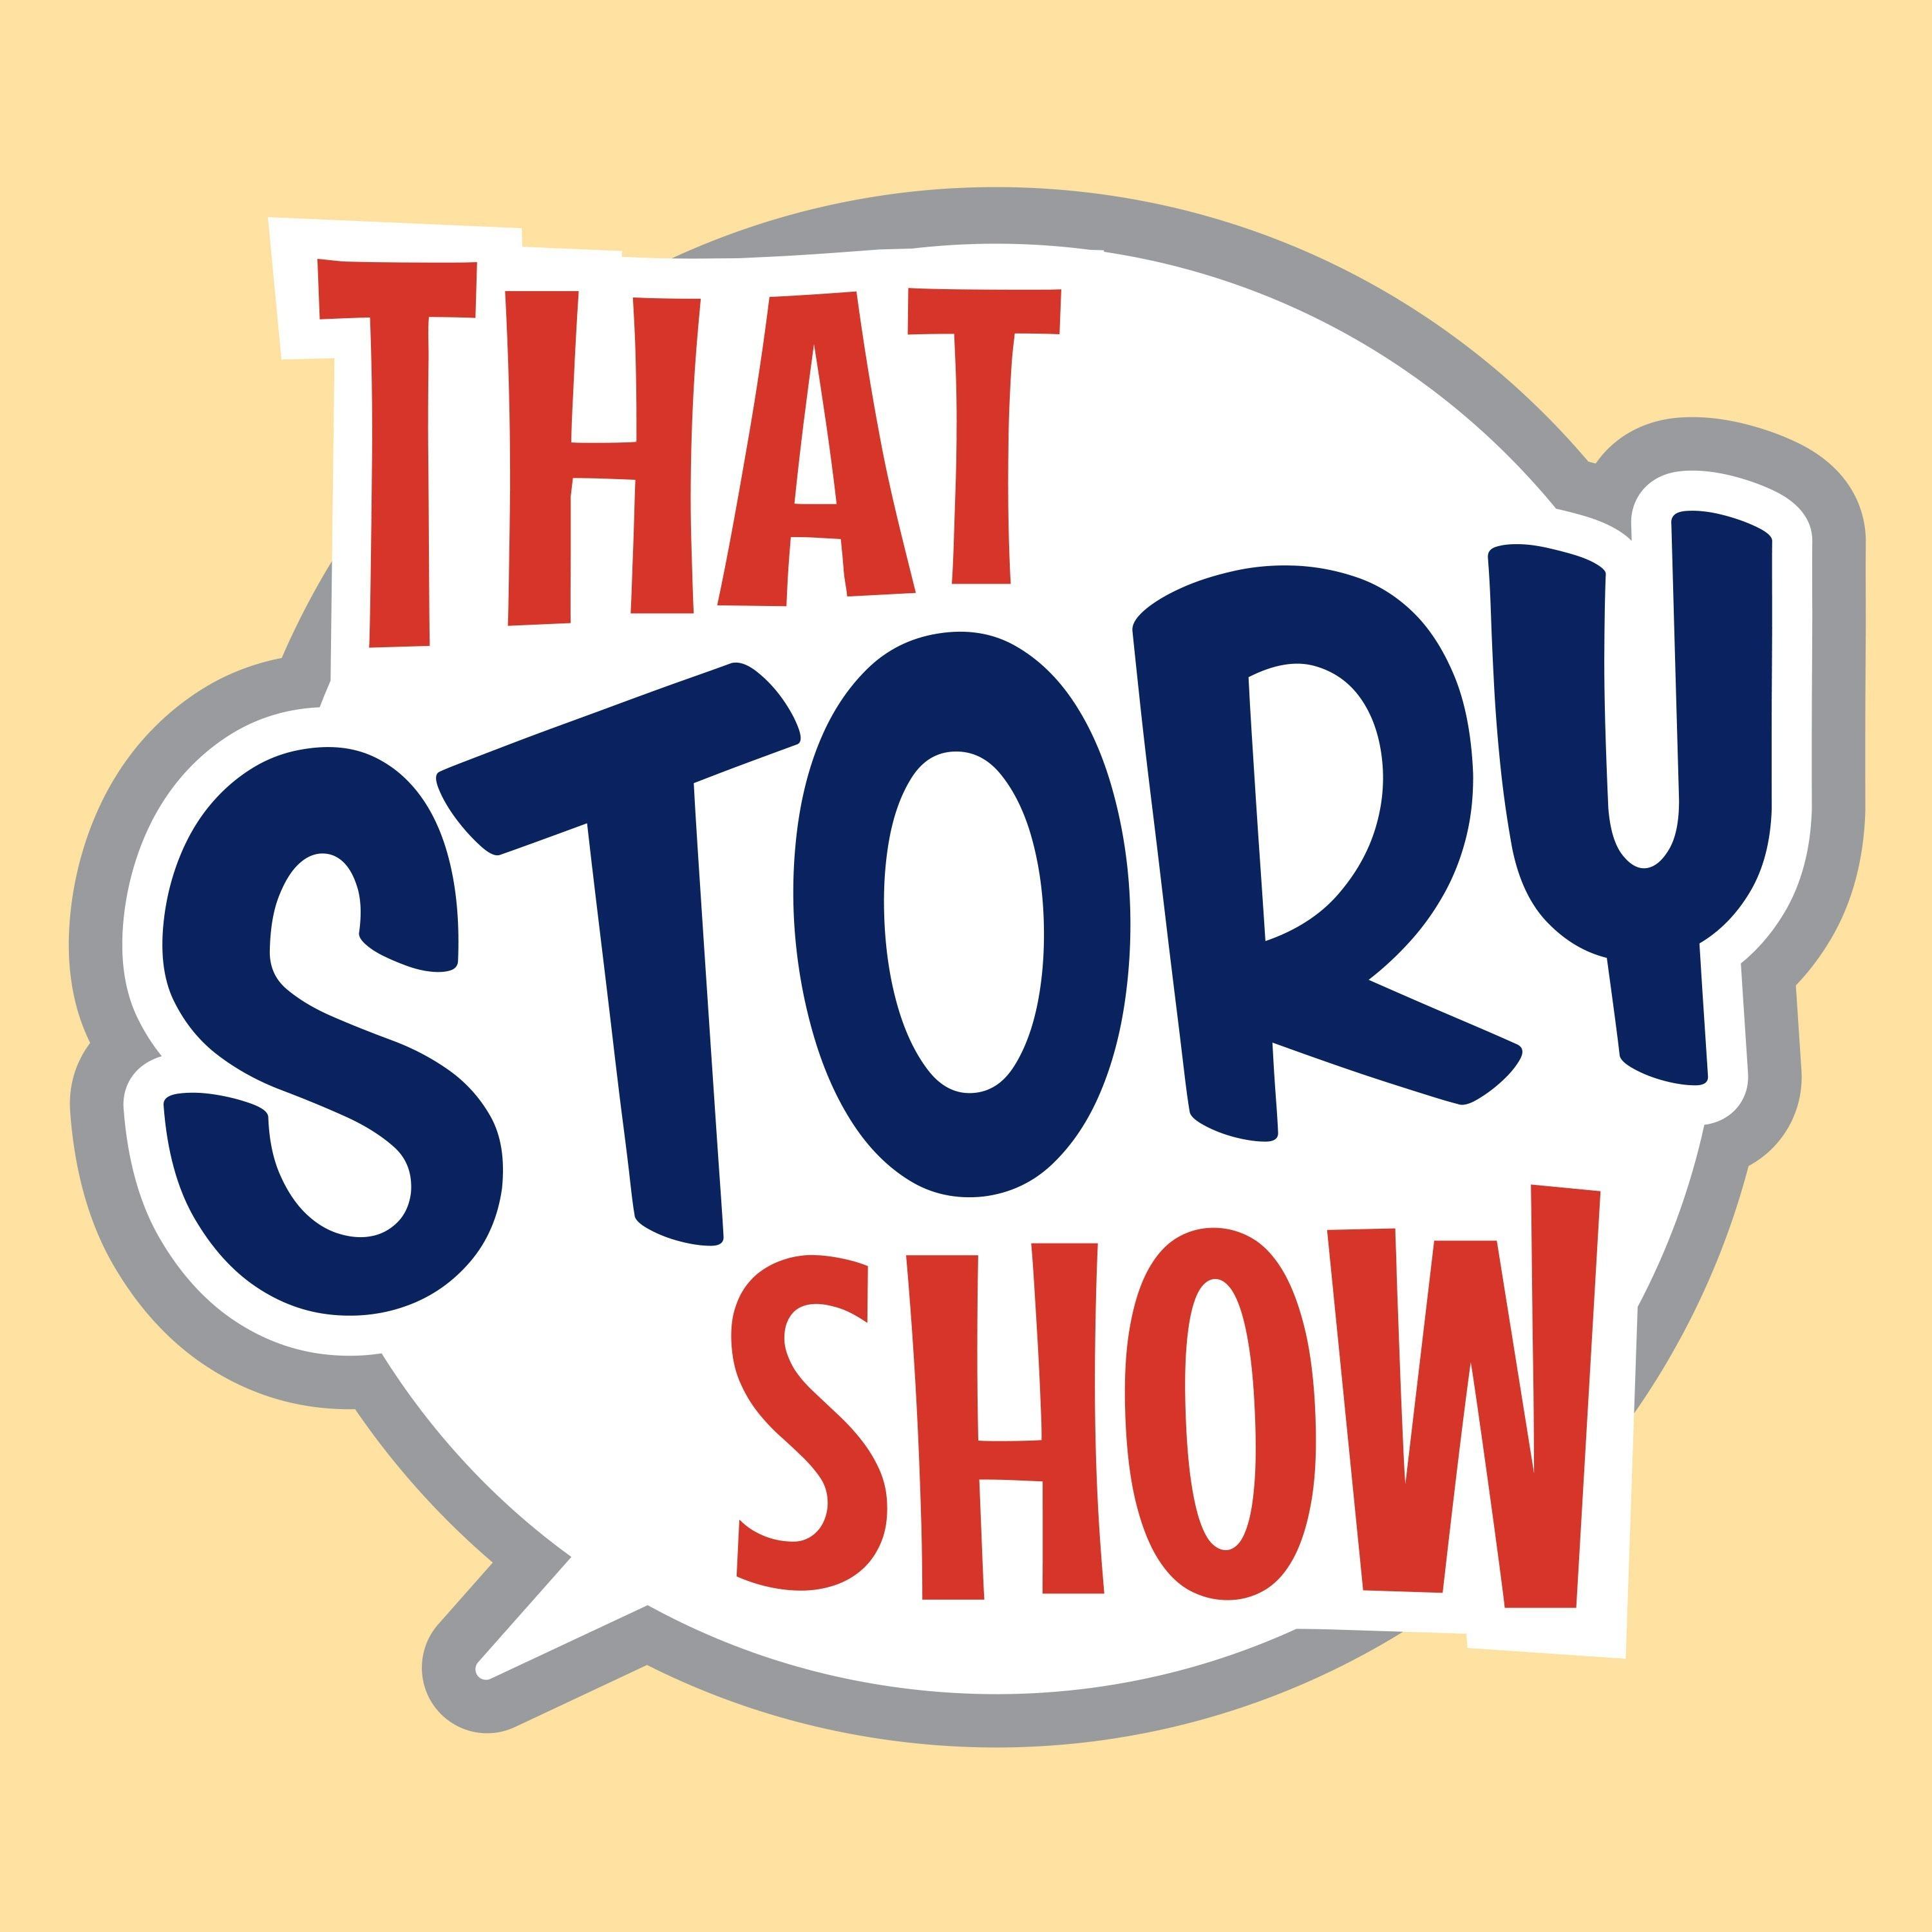 That Story Show - Clean Comedy